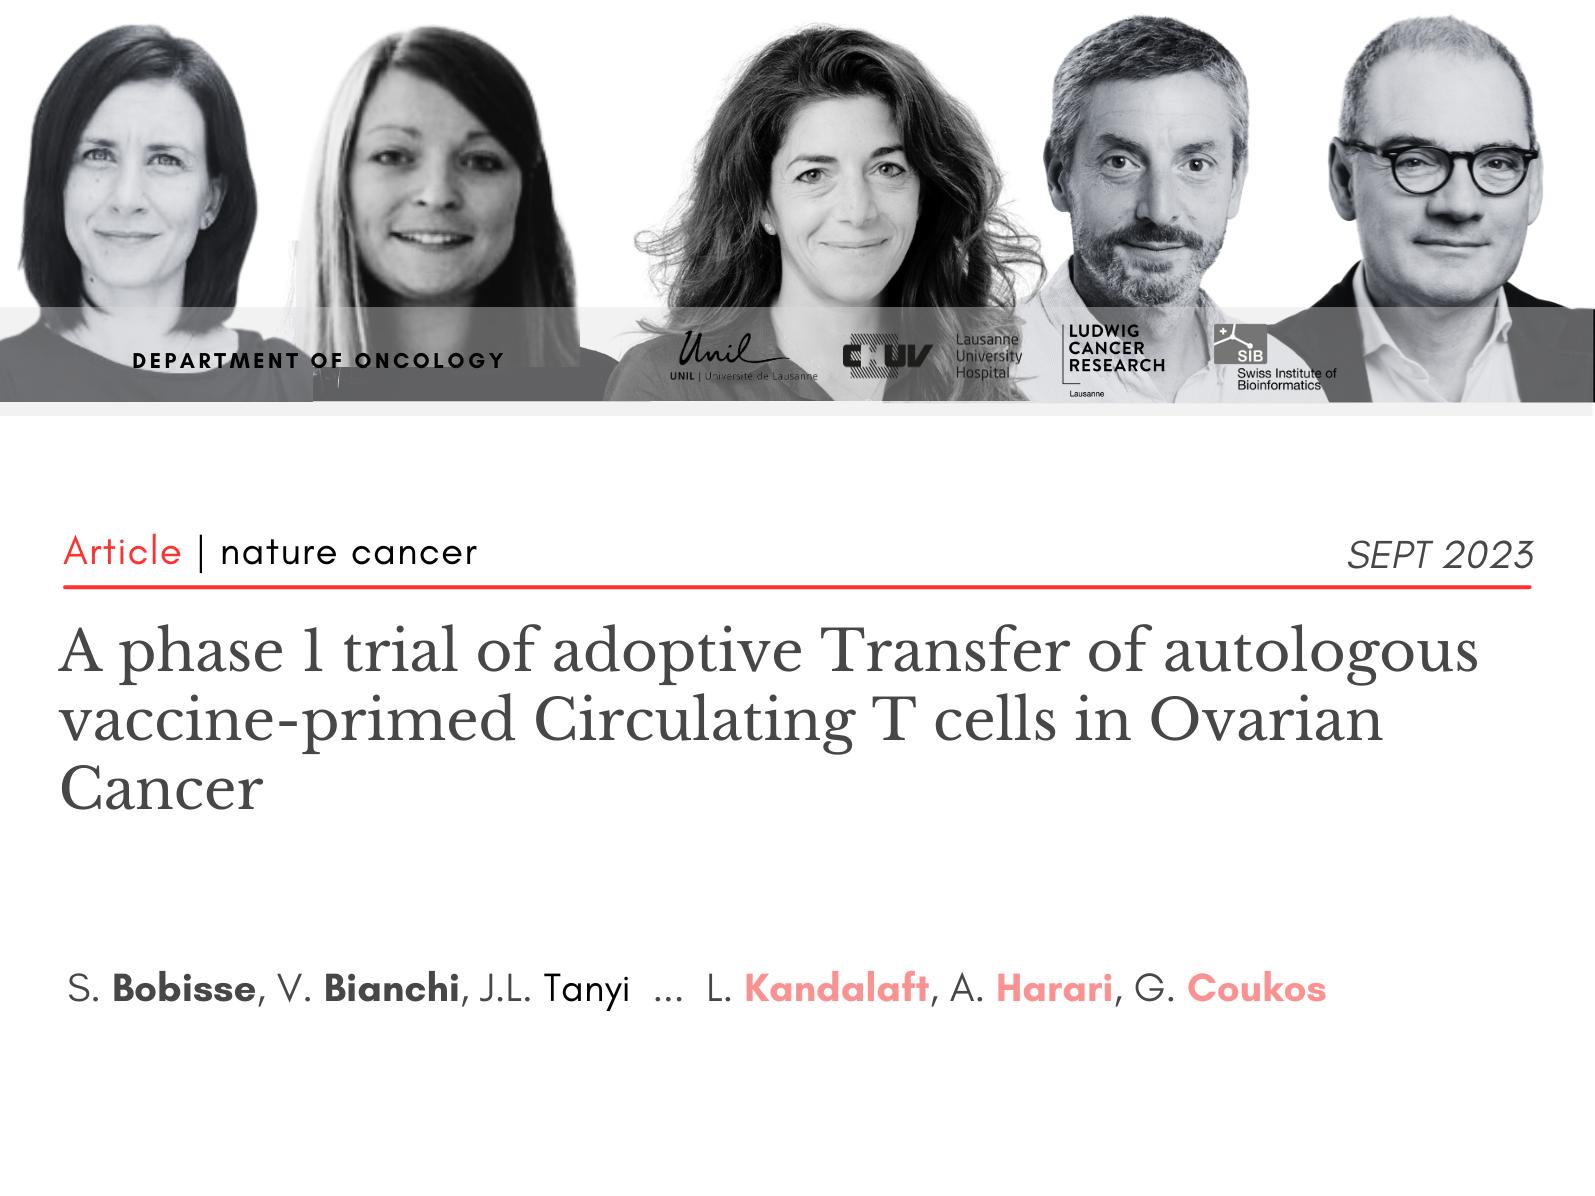 Results of a Phase 1 study combining personalized cancer vaccines with T-cell therapy to treat patients with ovarian cancer
